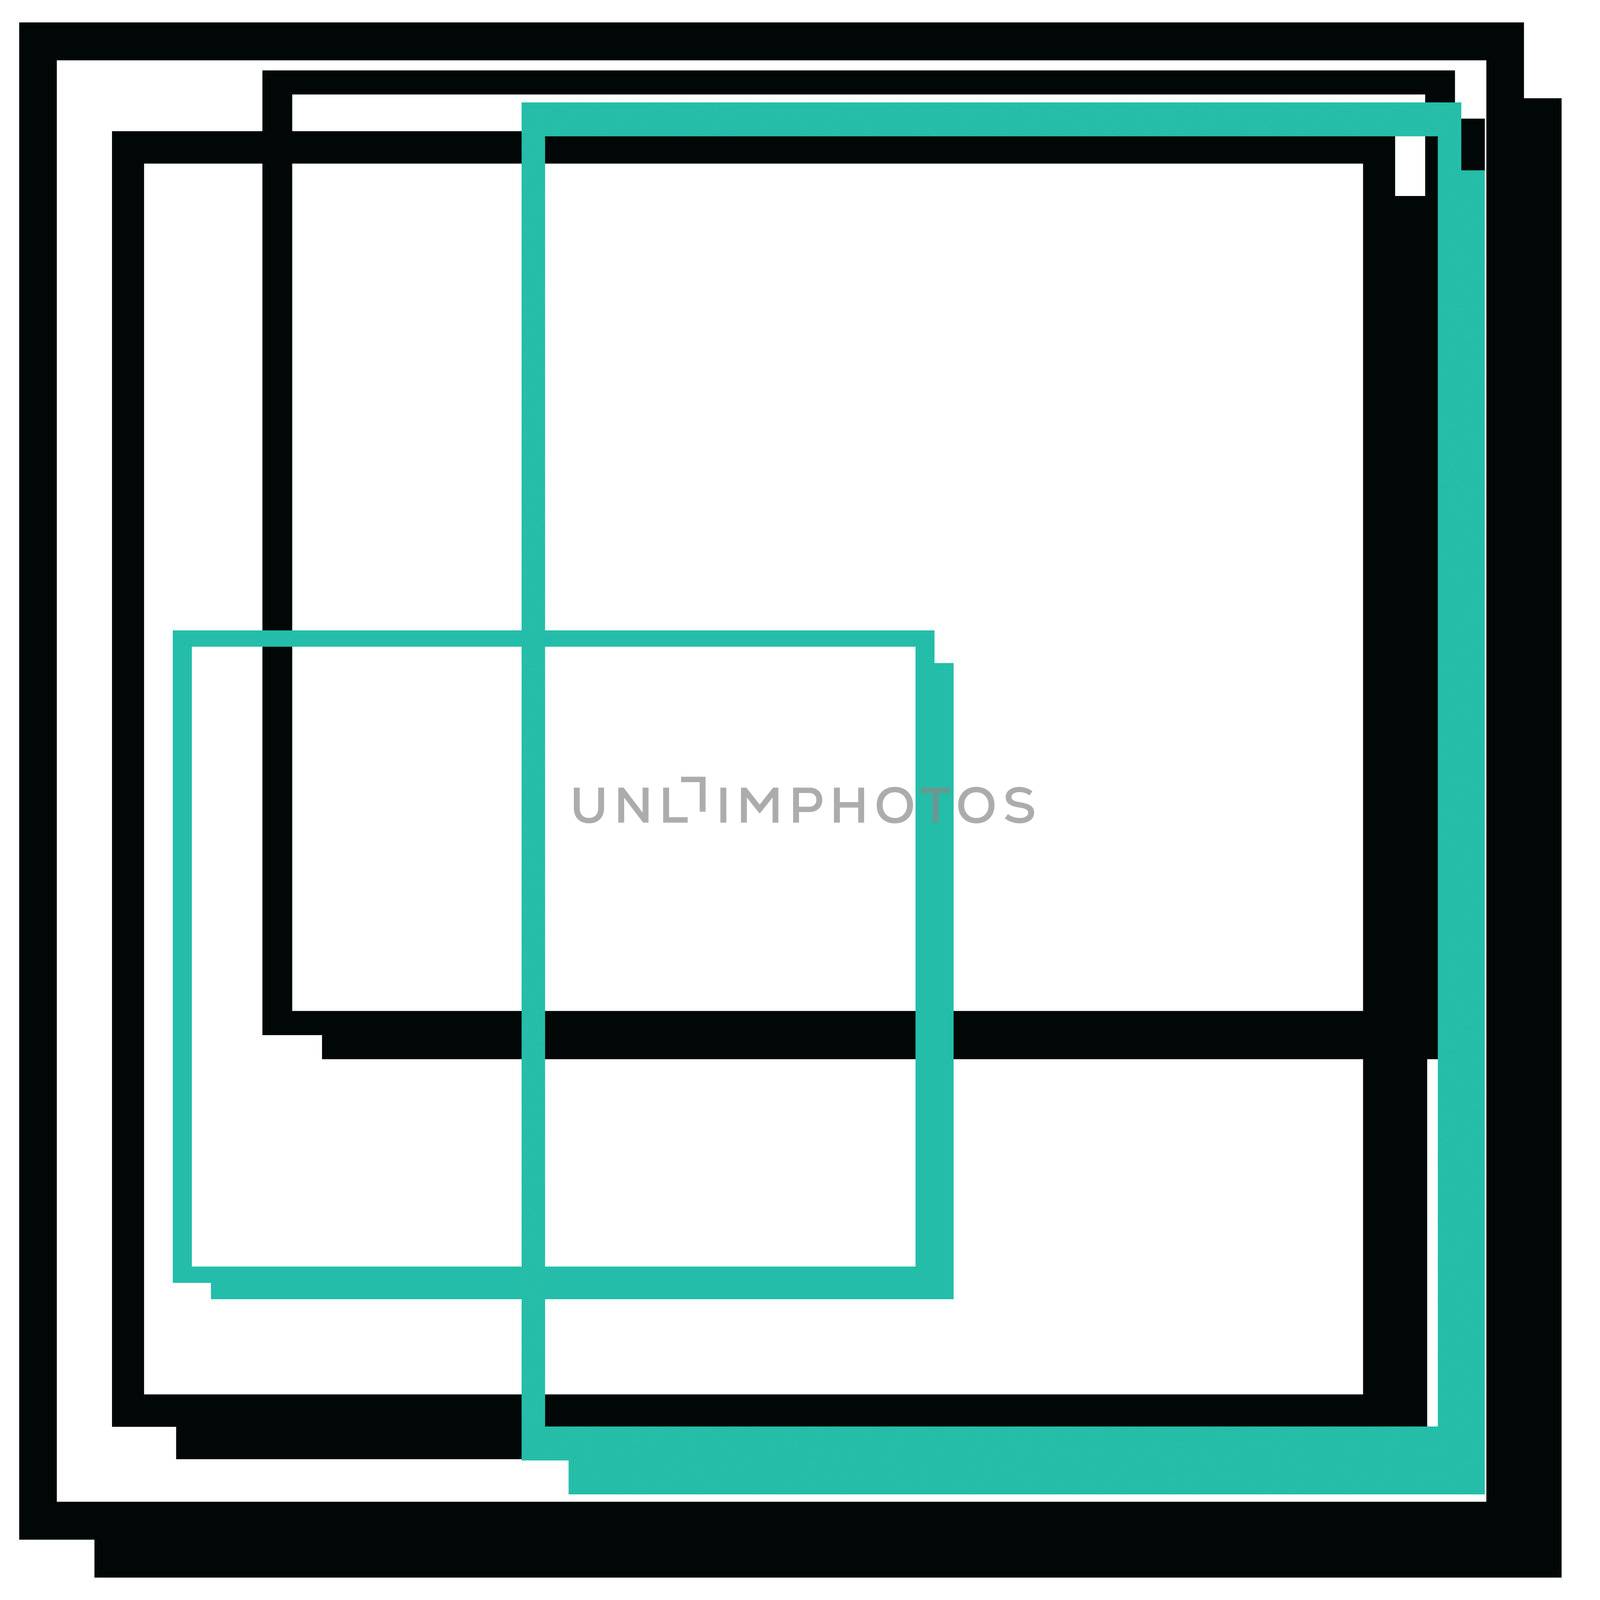 Mondrian type art work deals with geometric abstract